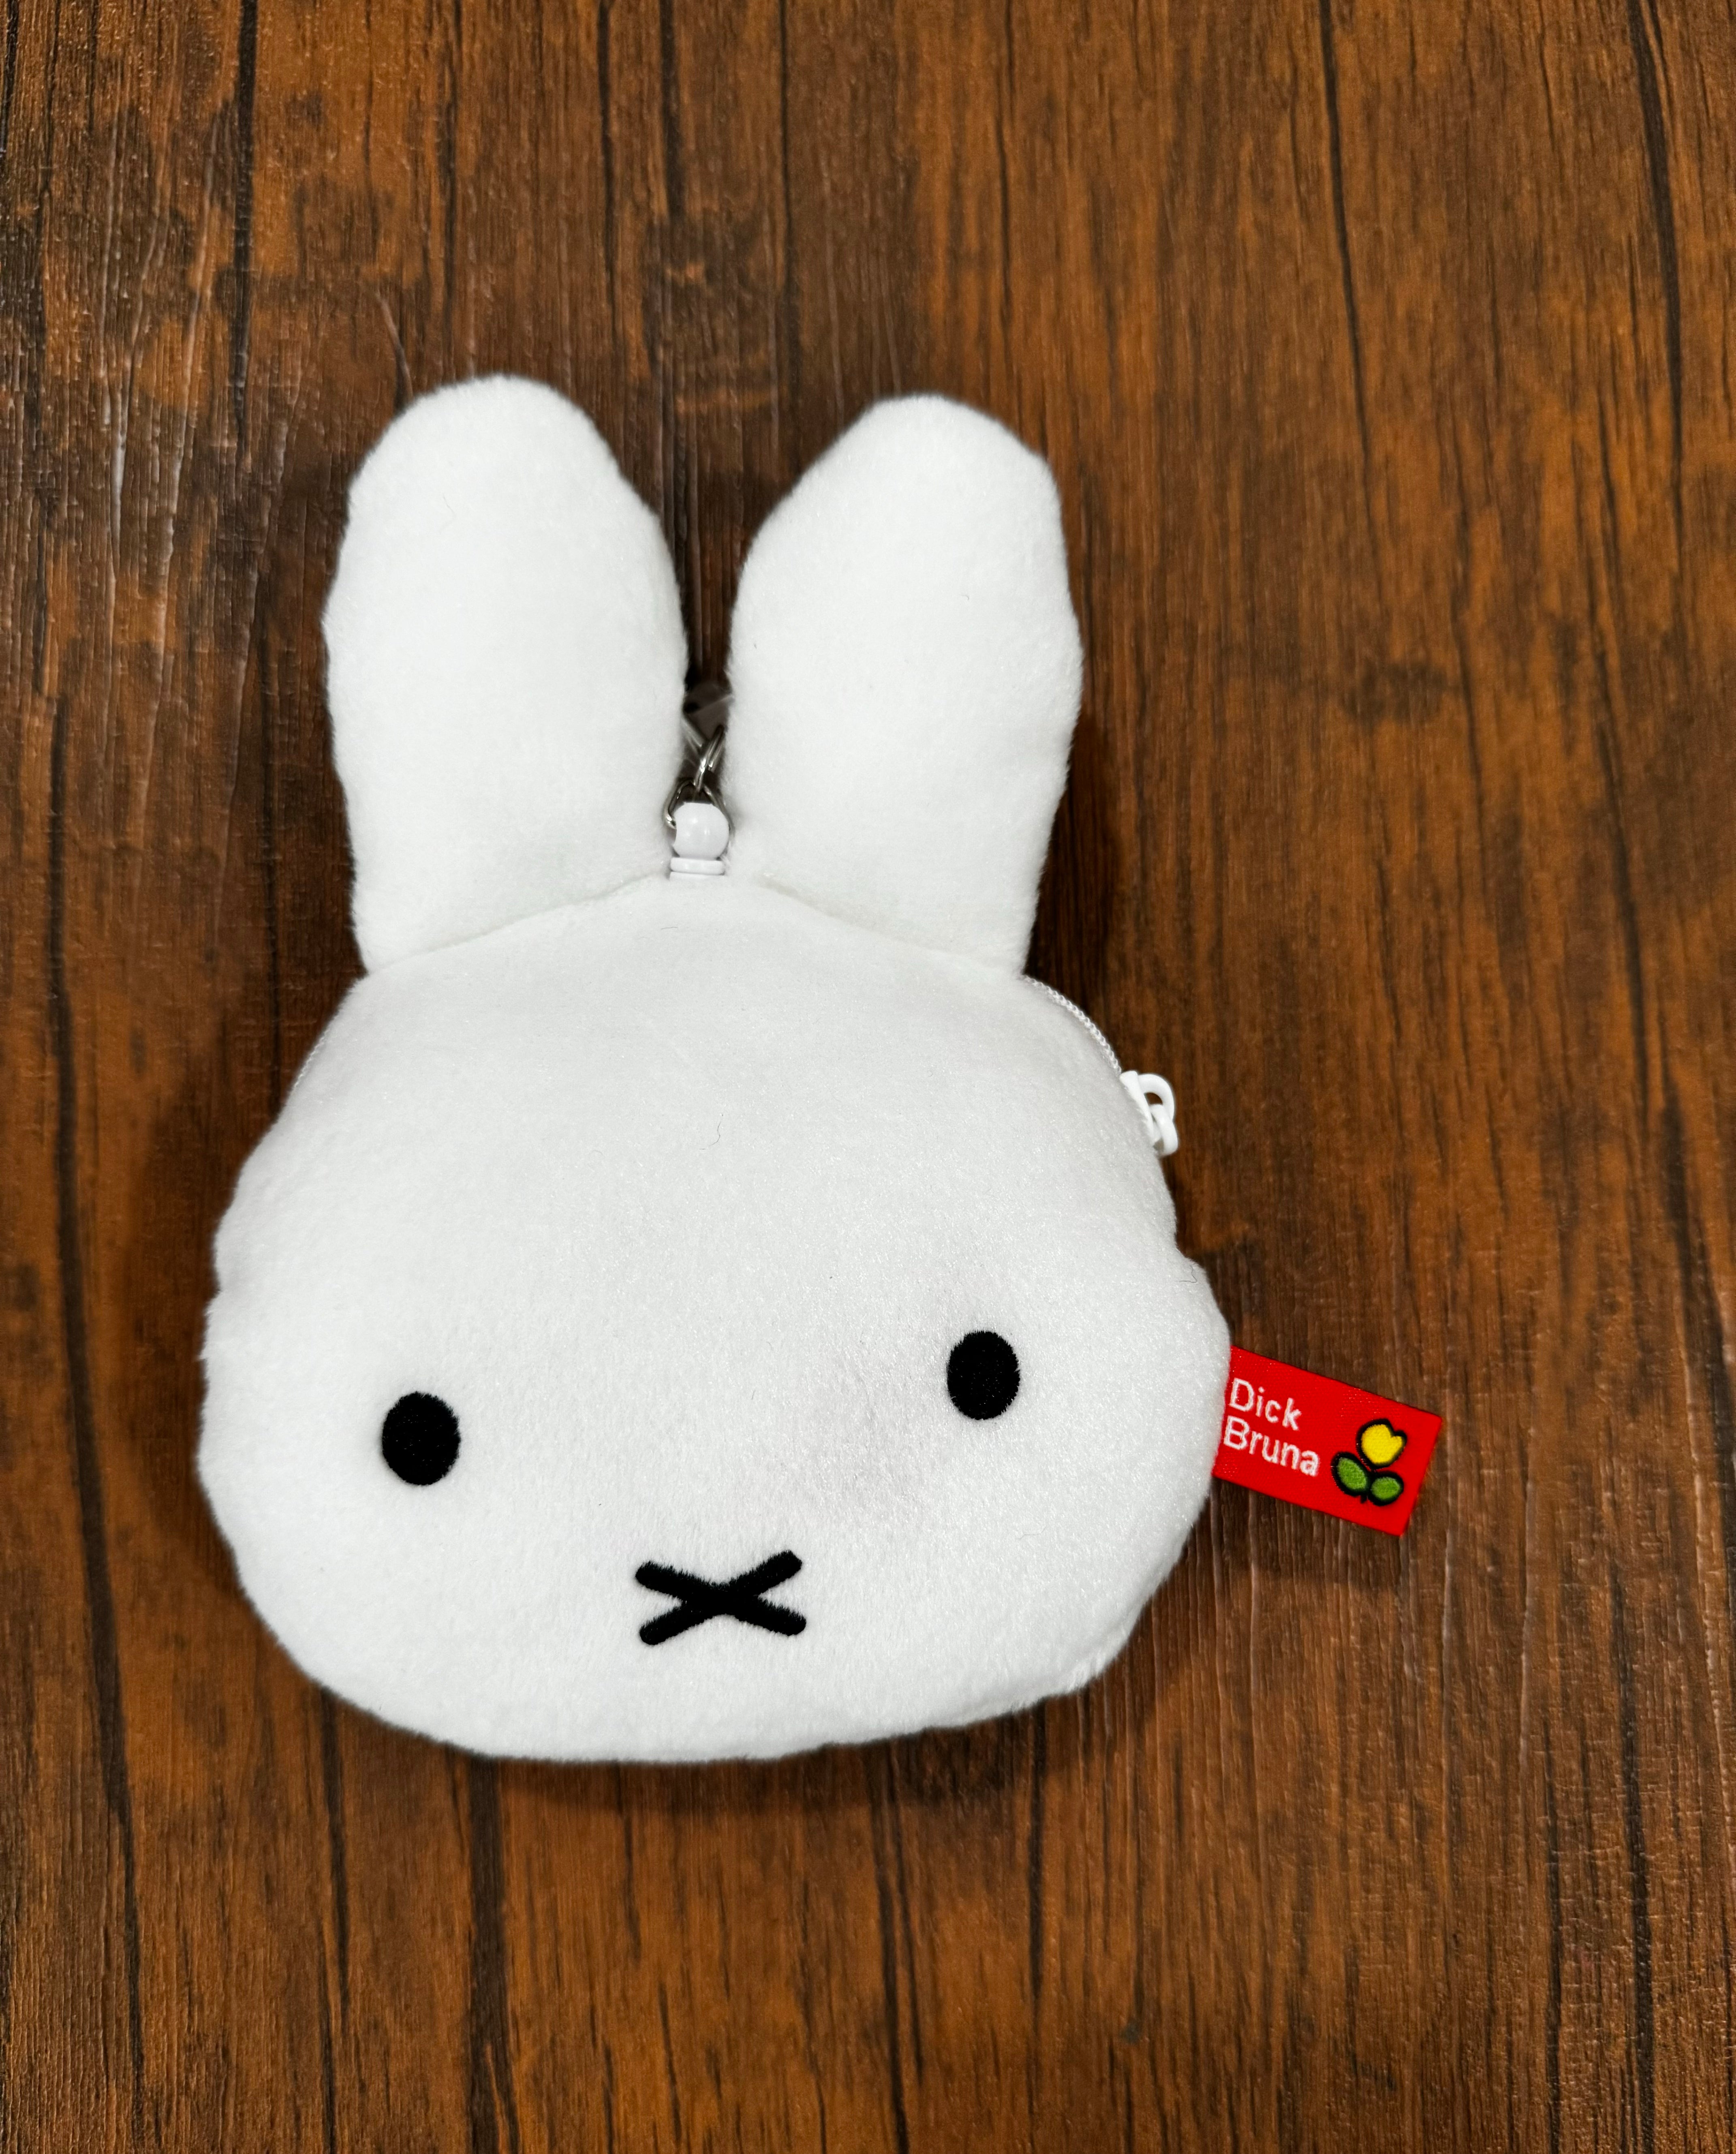 Miffy's face pass case, a white bunny-shaped coin purse, displayed on a wooden surface, featuring a red tag with white text and yellow flowers.